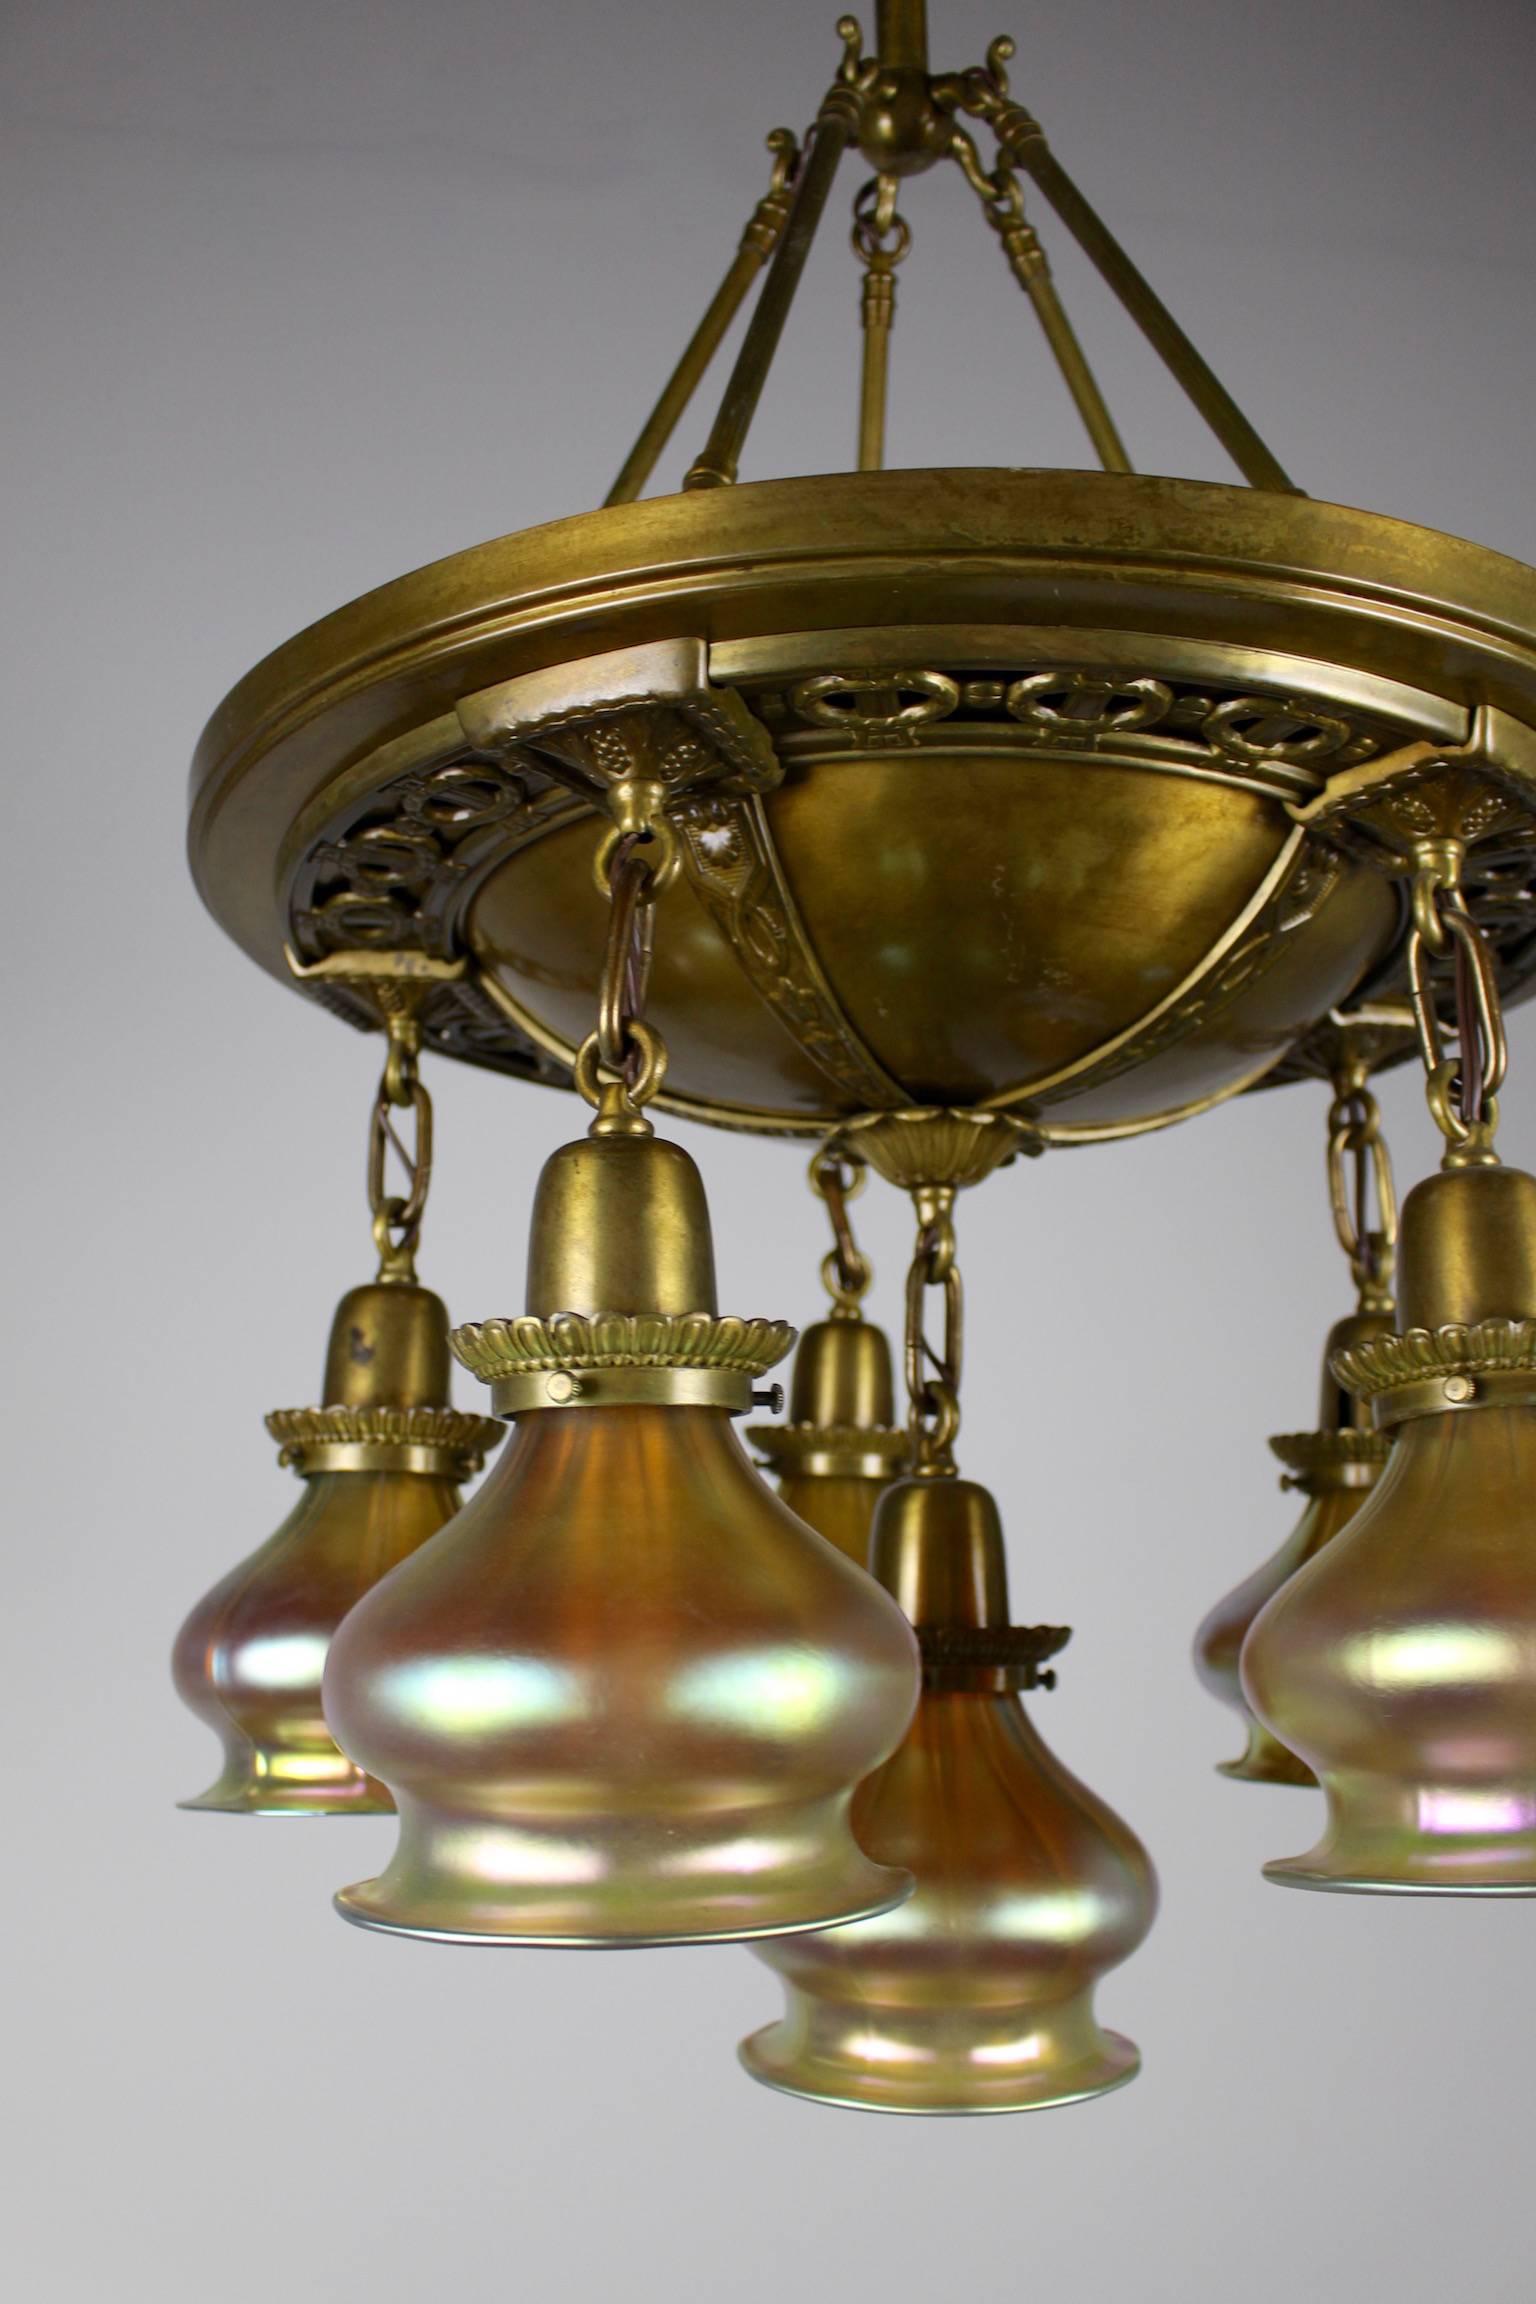 An elegant pan fixture of a generous size, circa 1915. Beautiful brass castings decorate the body of this light fixture. Six lights in total - five hanging at the same level, with the central light staggered lower for depth. Art glass shades are in